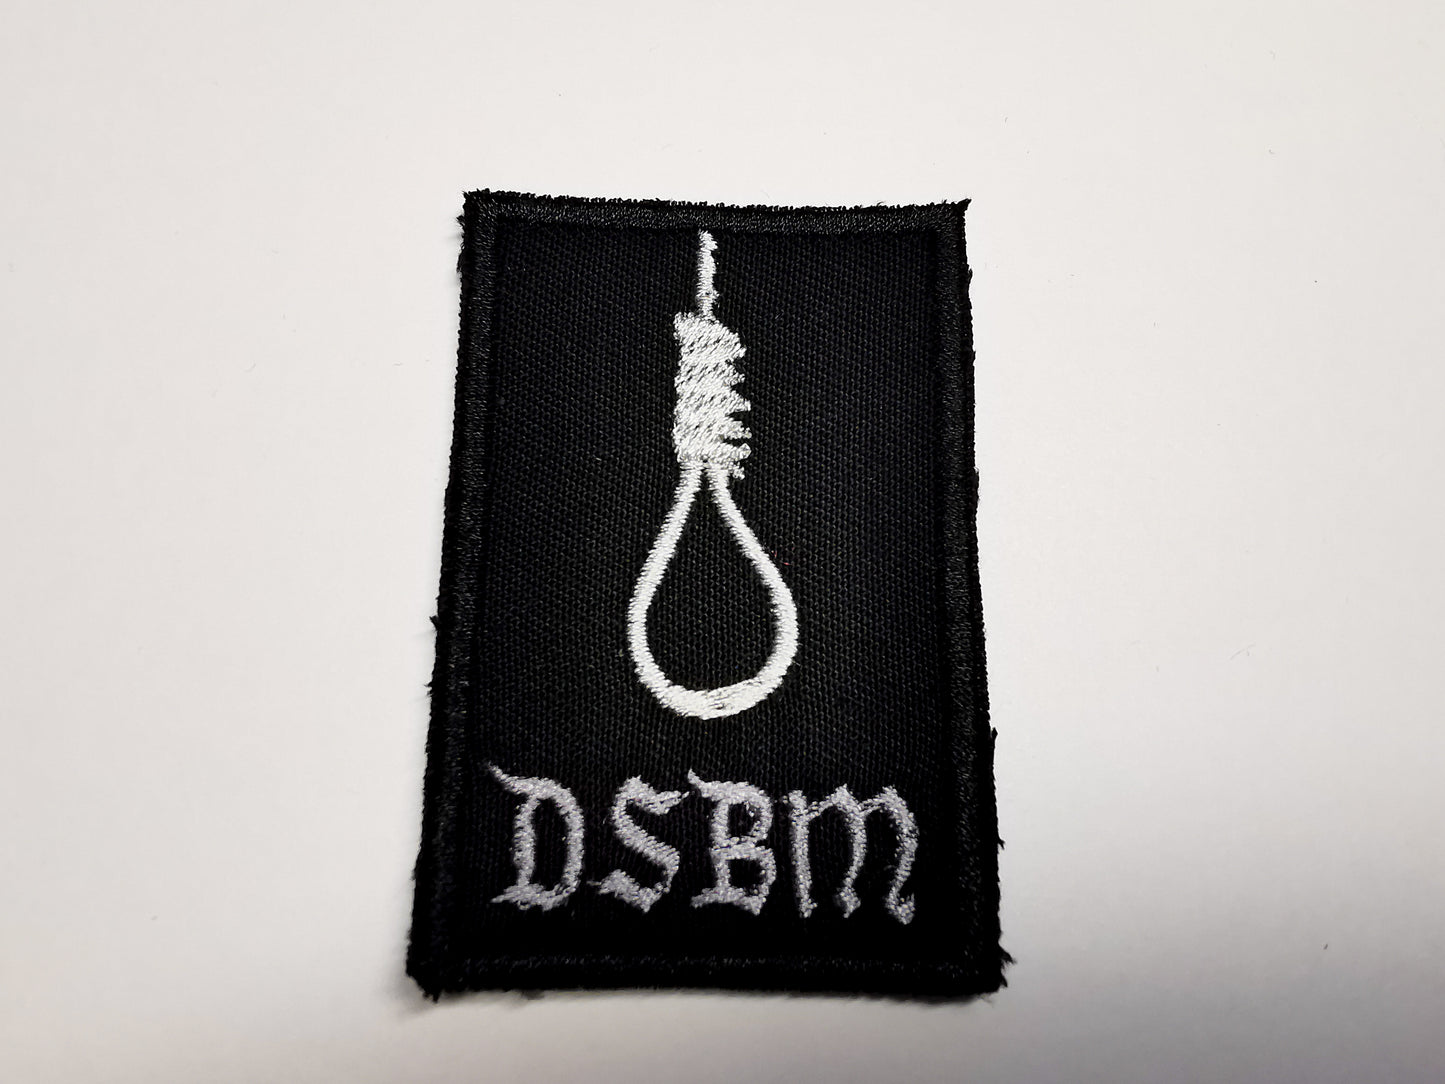 Depressive Black Metal Embroidered Patch Silver and Pewter